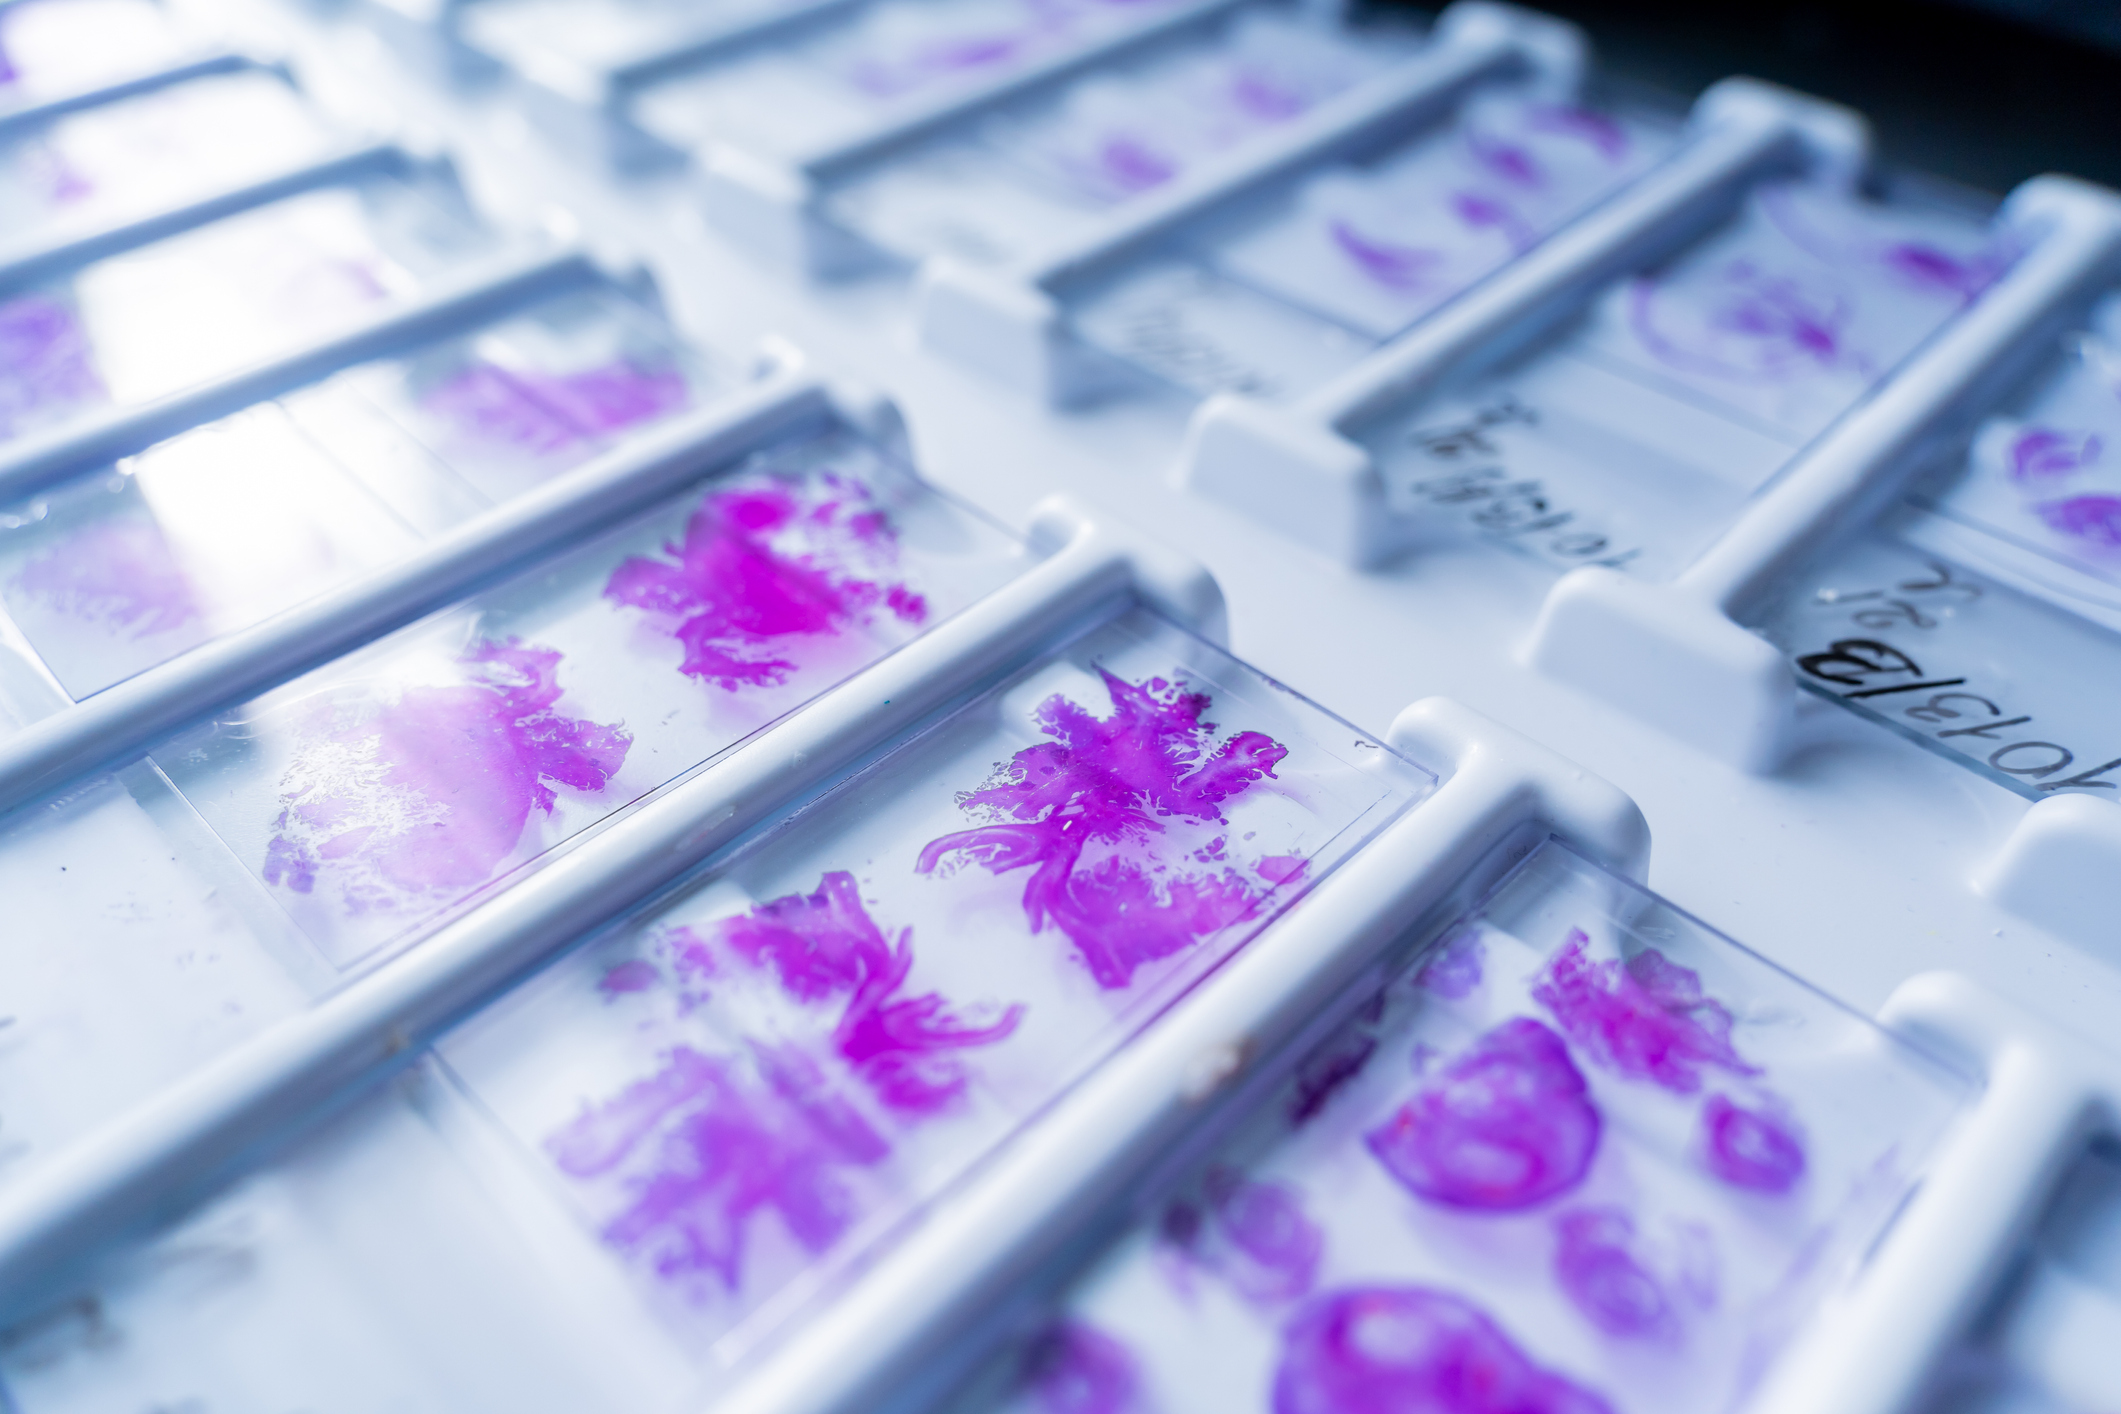 Rows of glass microscope slides with purple-dyed cells